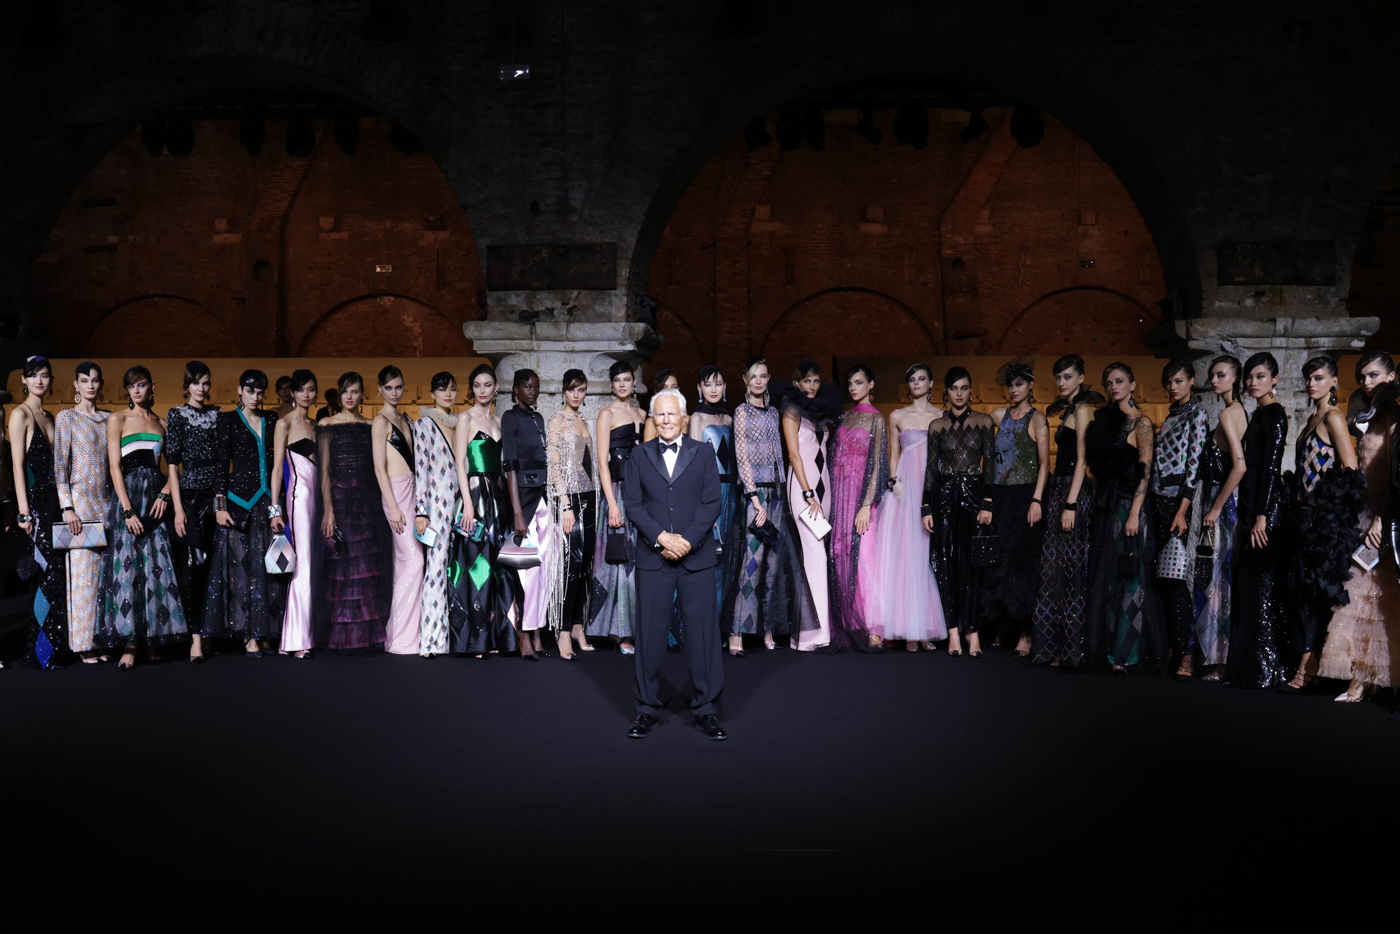 Giorgio Armani and his models at the One Night Only Venezia event during the 80th Mostra , photo by Marco Tassini for EDGE magazine